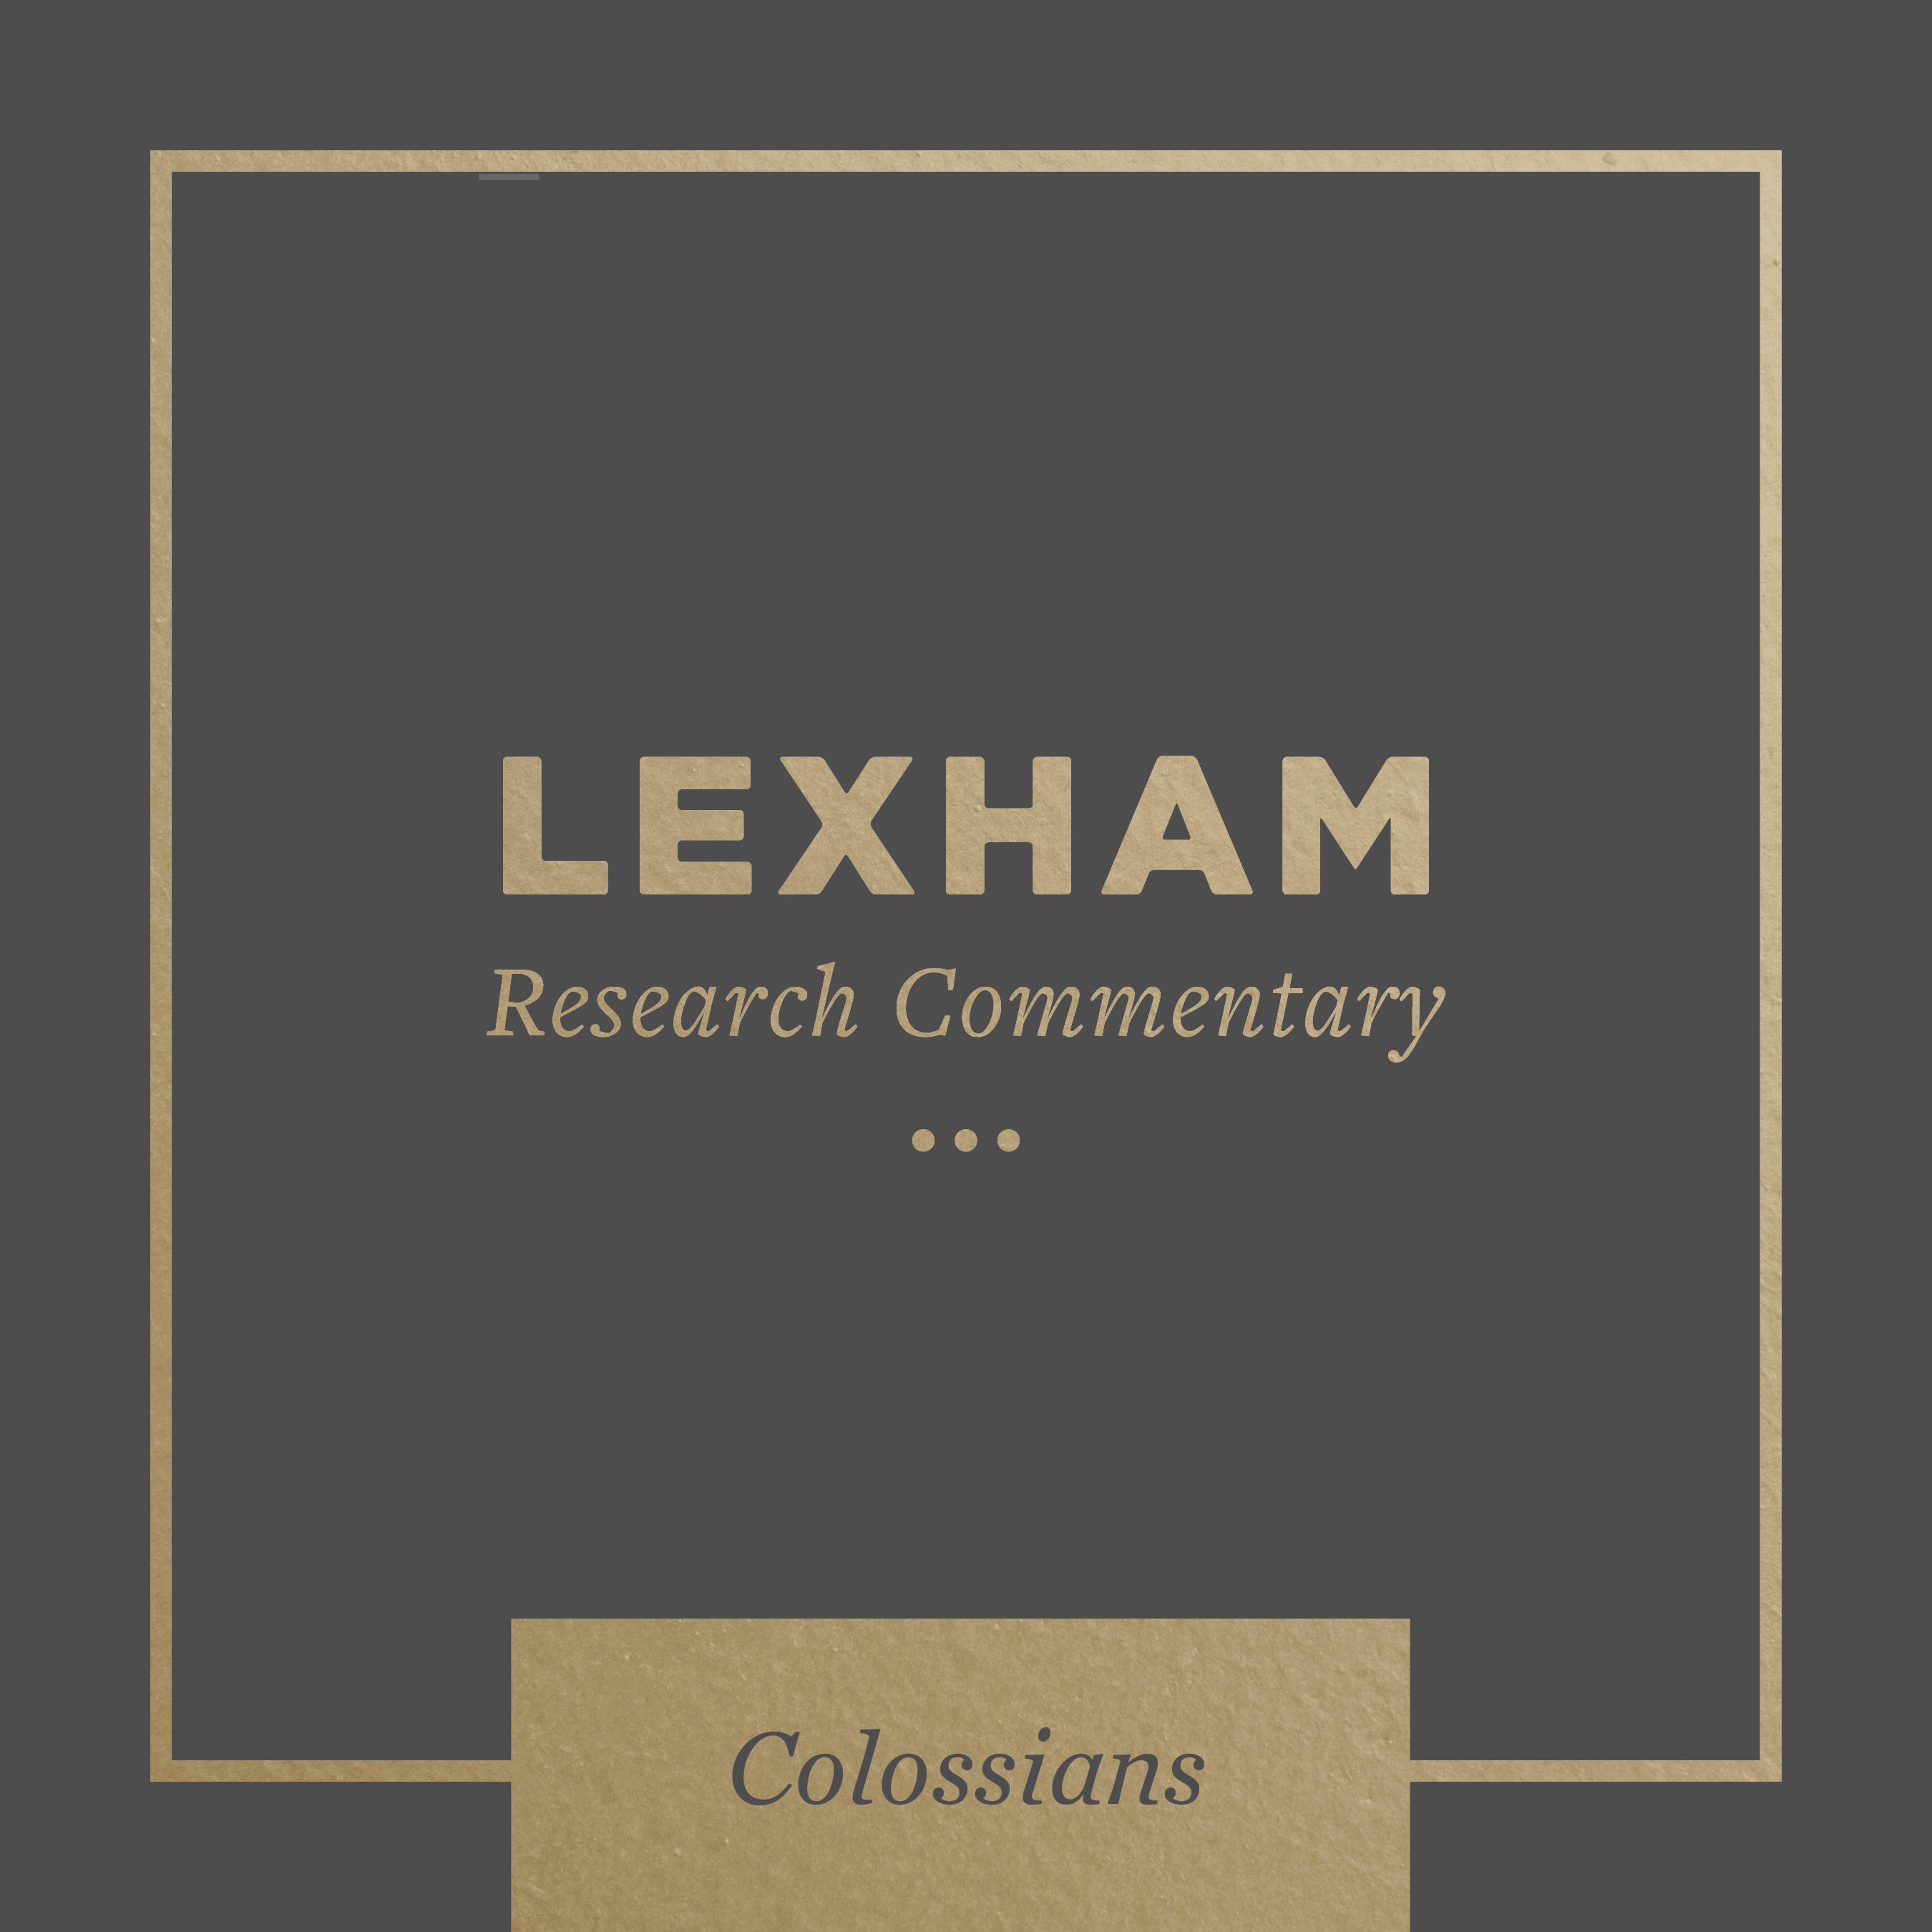 Lexham Research Commentary: Colossians